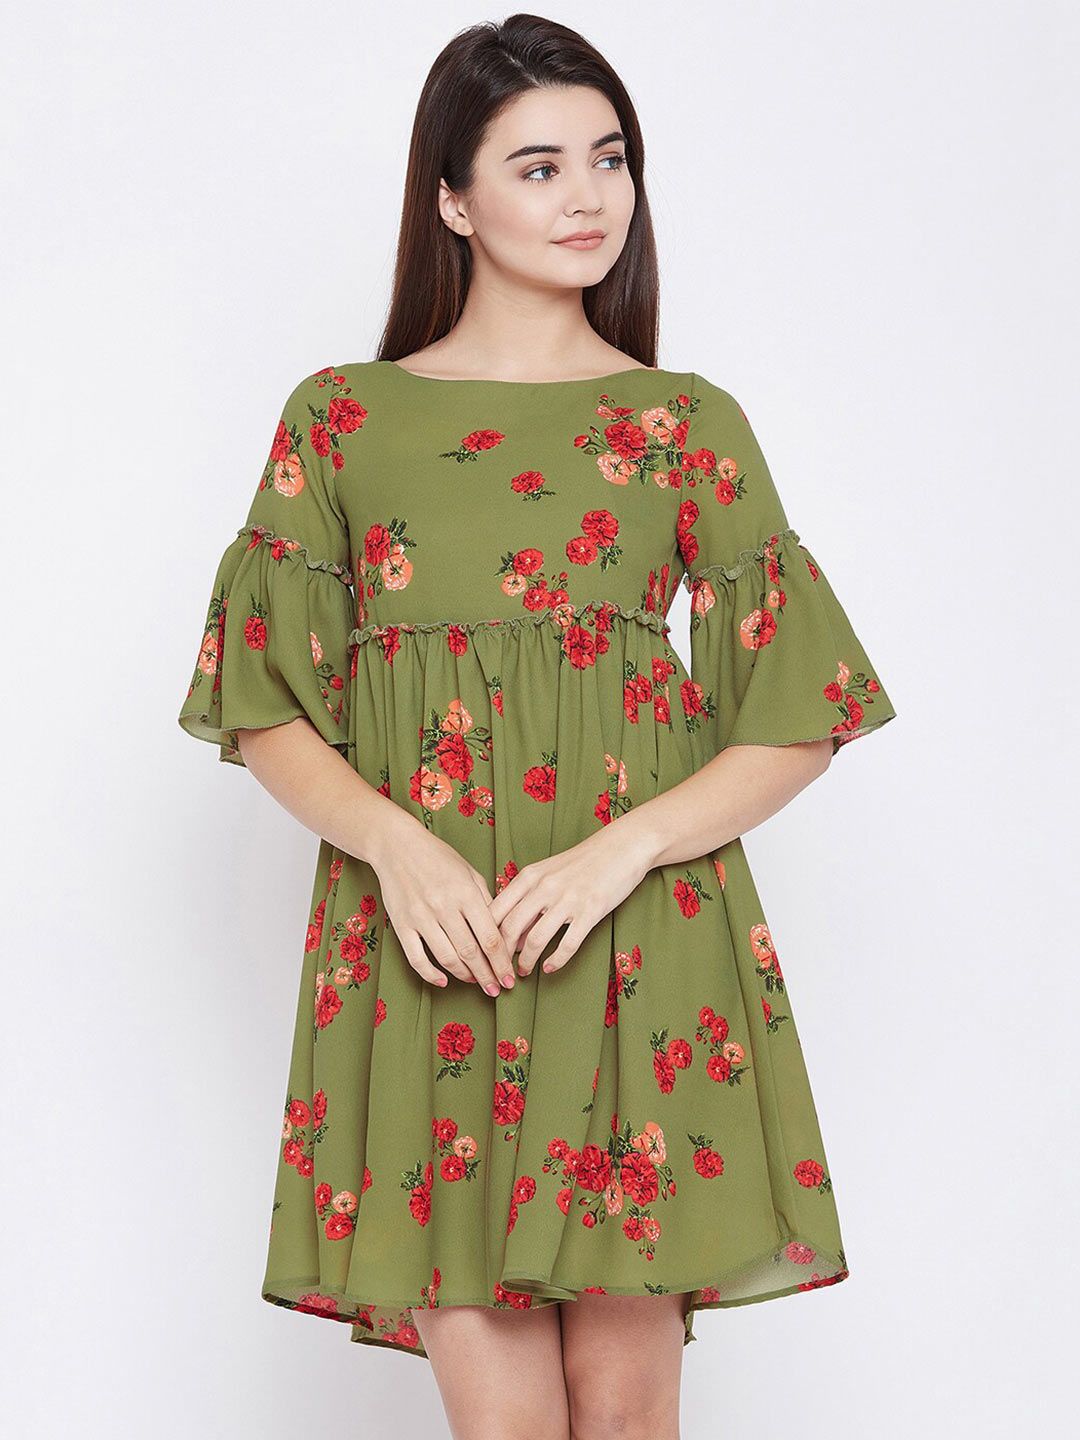 PANIT Olive Green Floral Crepe Empire Dress Price in India